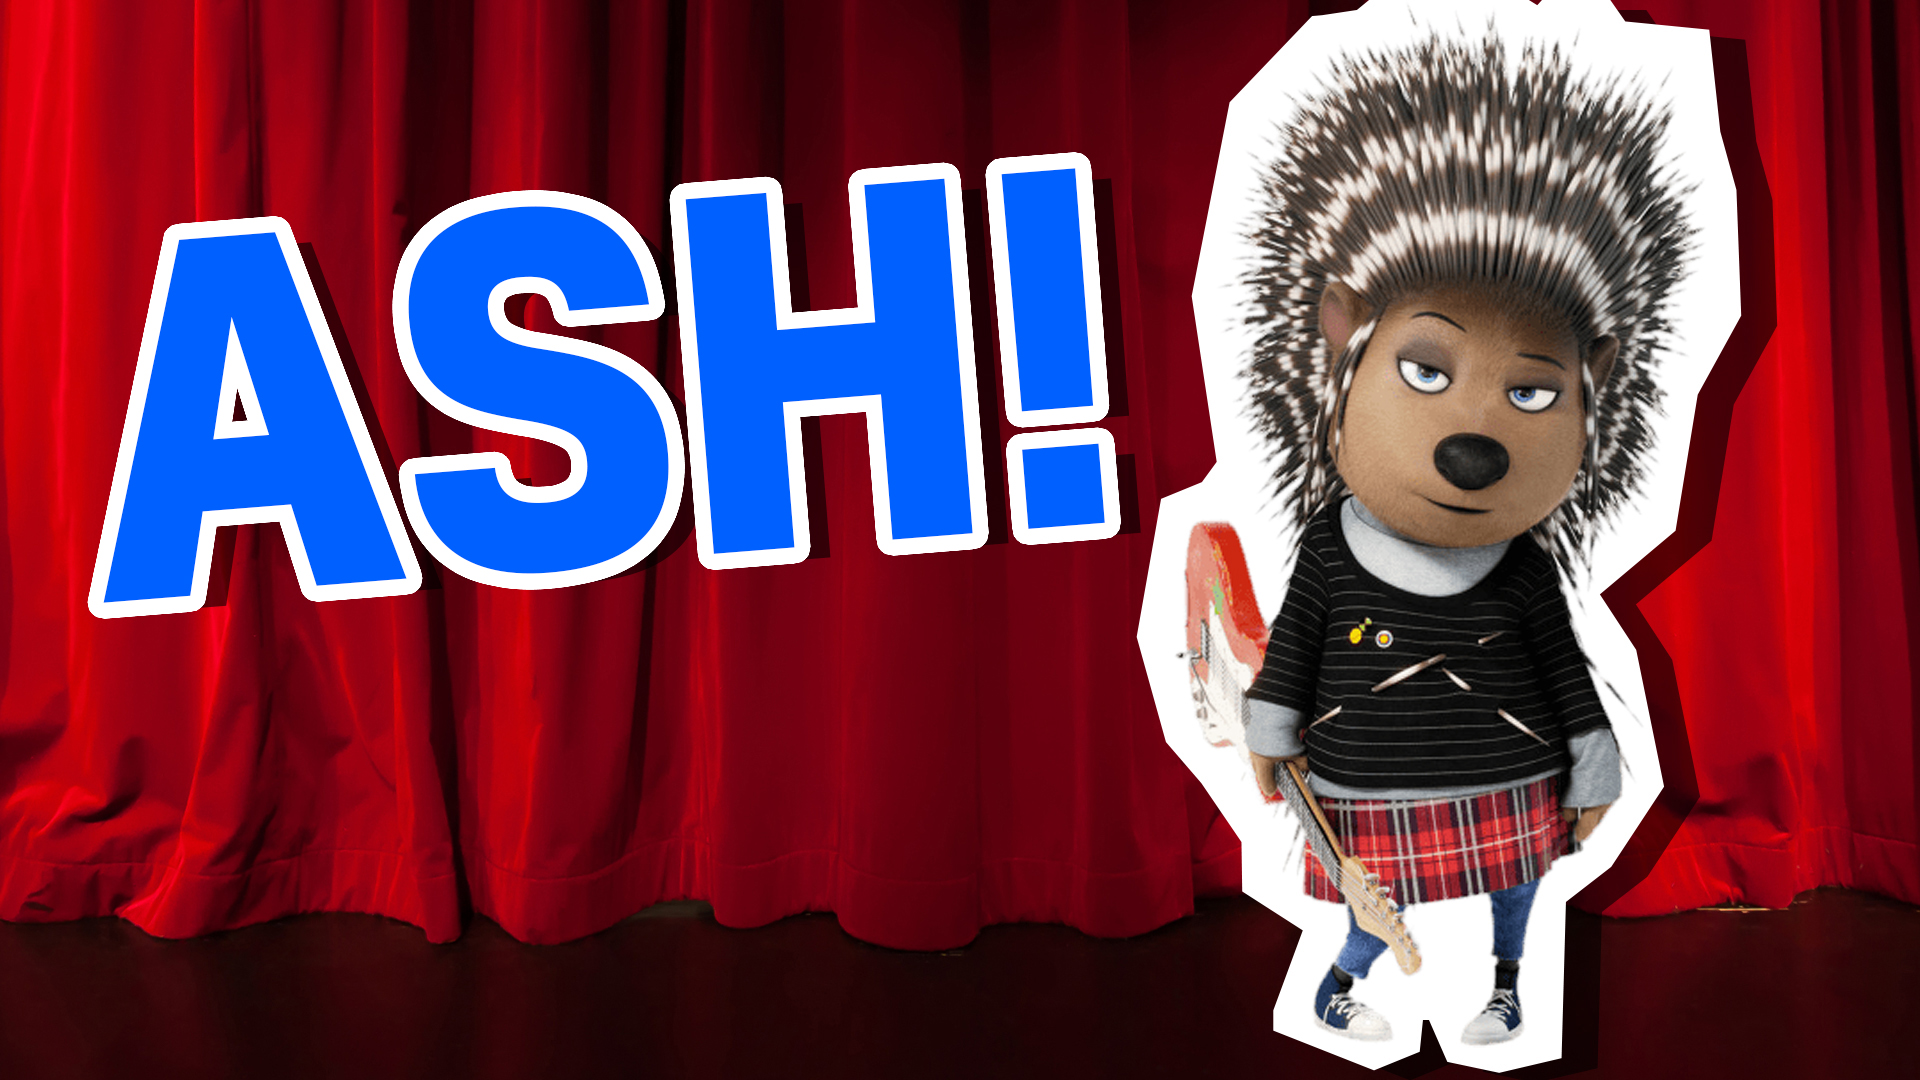 Ash from Sing! What Sing Character Are You? | Sing Quiz